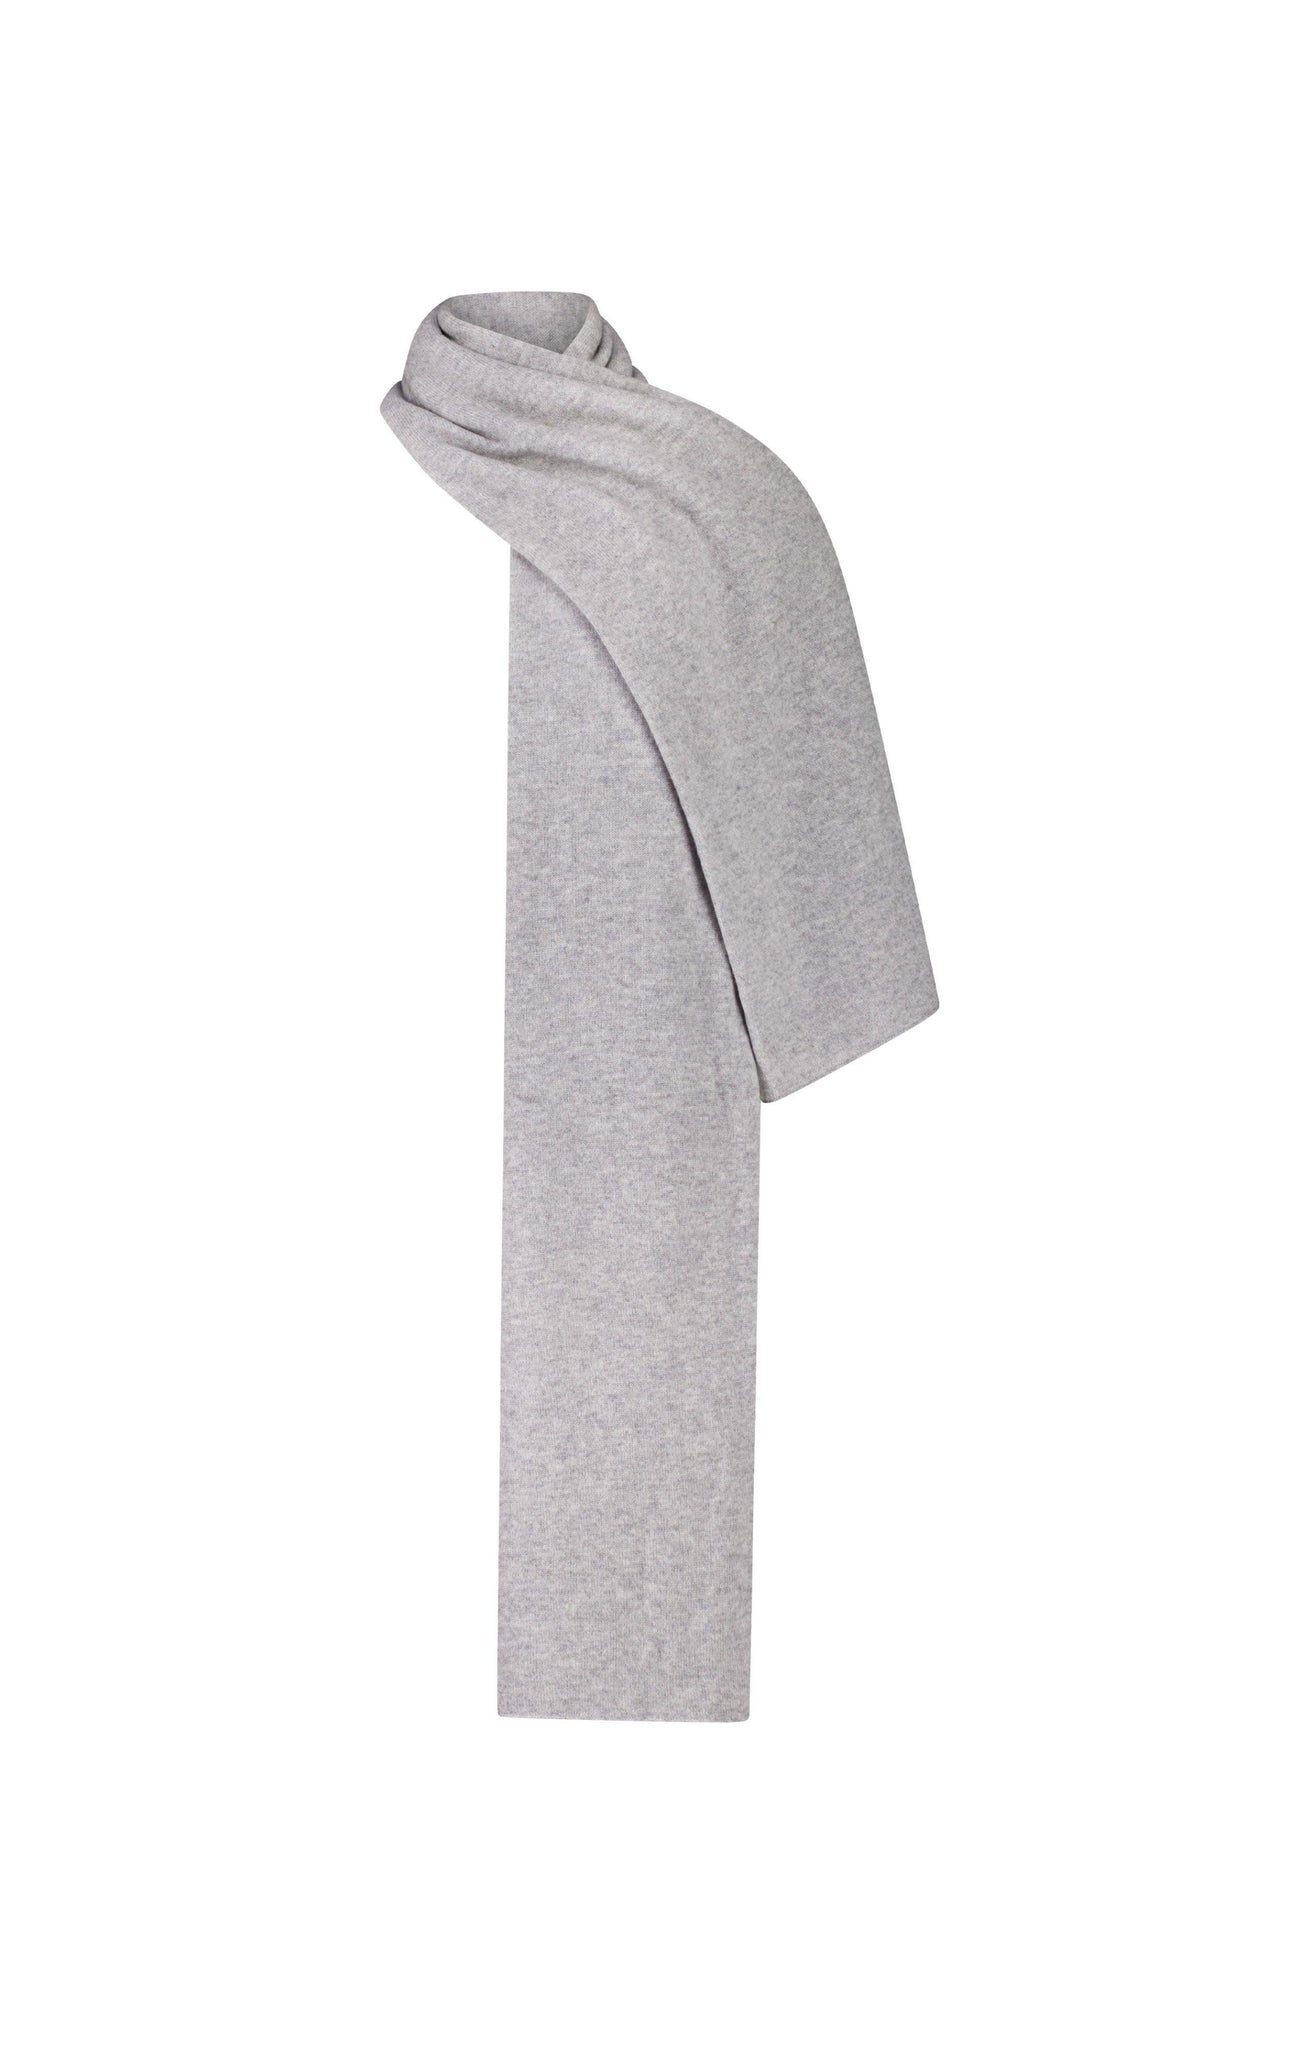 Cashmere Wear Anywhere Wrap - Skin and Threads